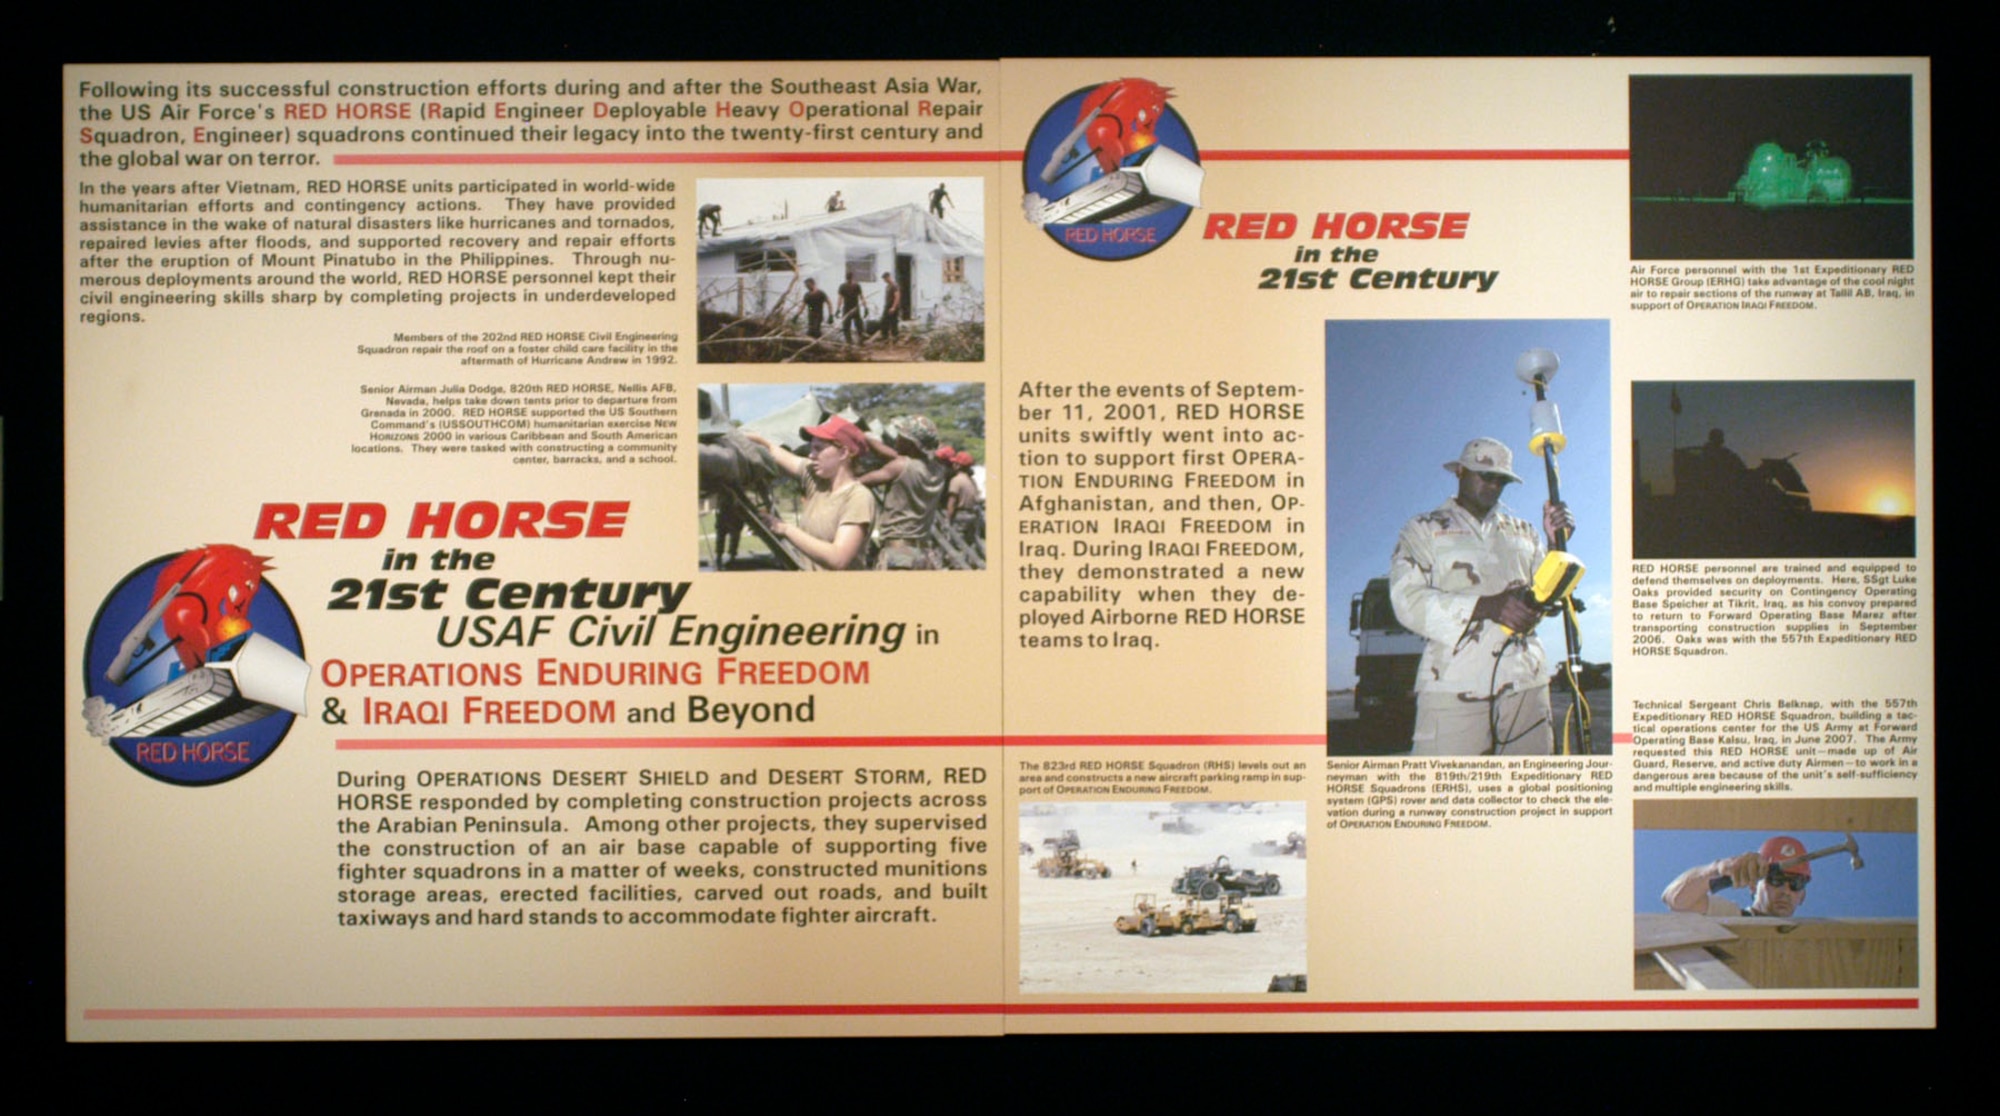 DAYTON, Ohio -- RED HORSE exhibit in the Cold War Gallery at the National Museum of the United States Air Force. (U.S. Air Force photo)